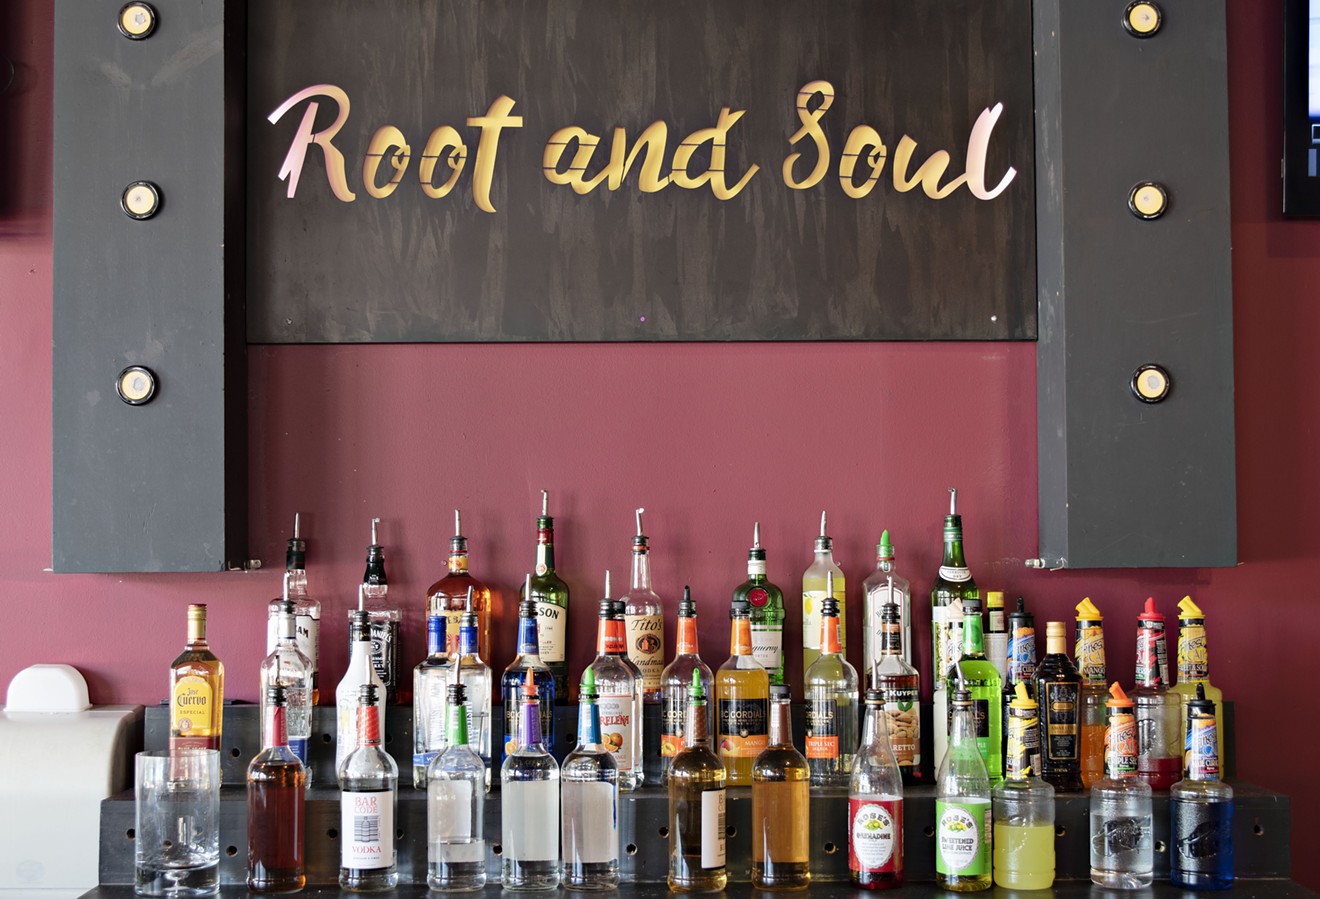 Go to The Root and Soul for some food...and drink.